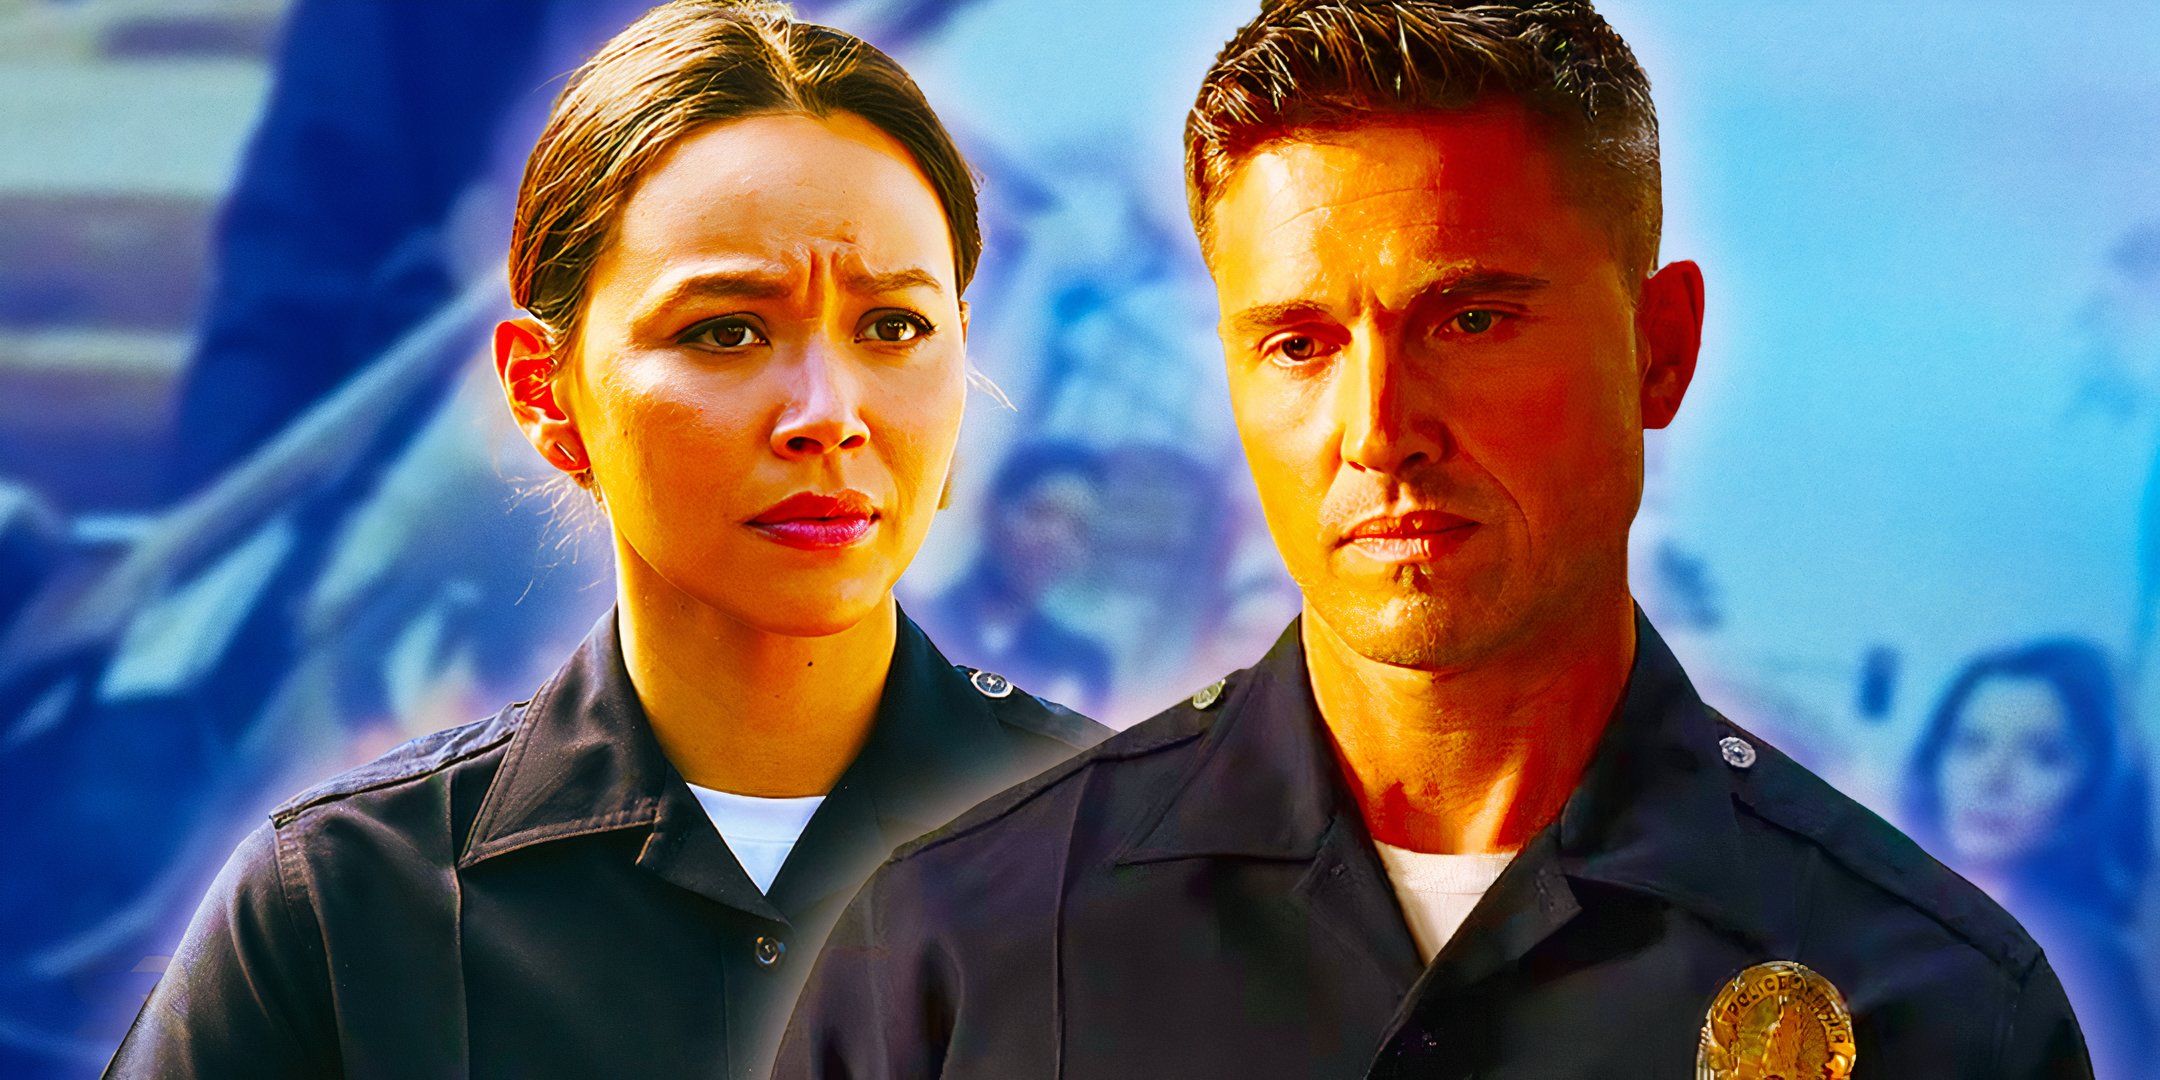 Melissa O'Neil as Lucy Chen and Eric Winter as Tim Bradford in The Rookie.